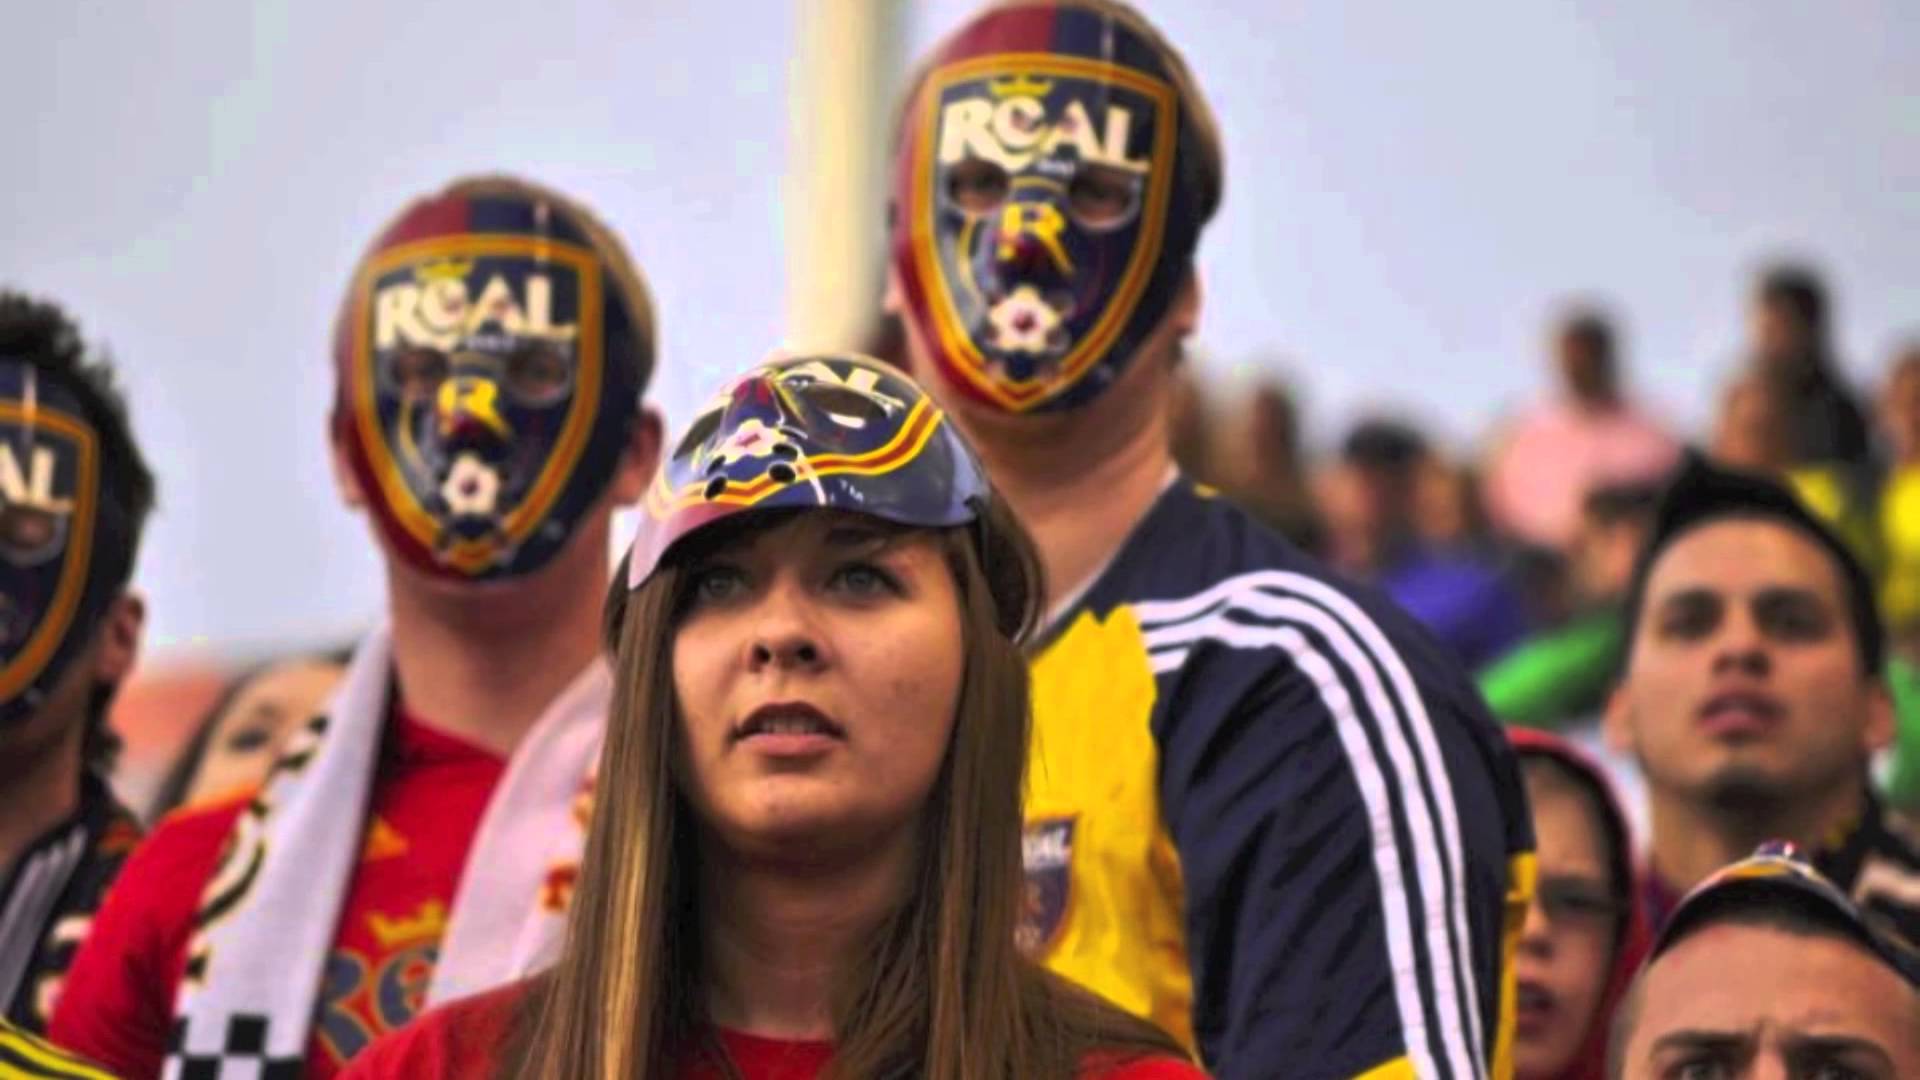 RSL Believe Song REMIX Real Salt Lake - YouTube